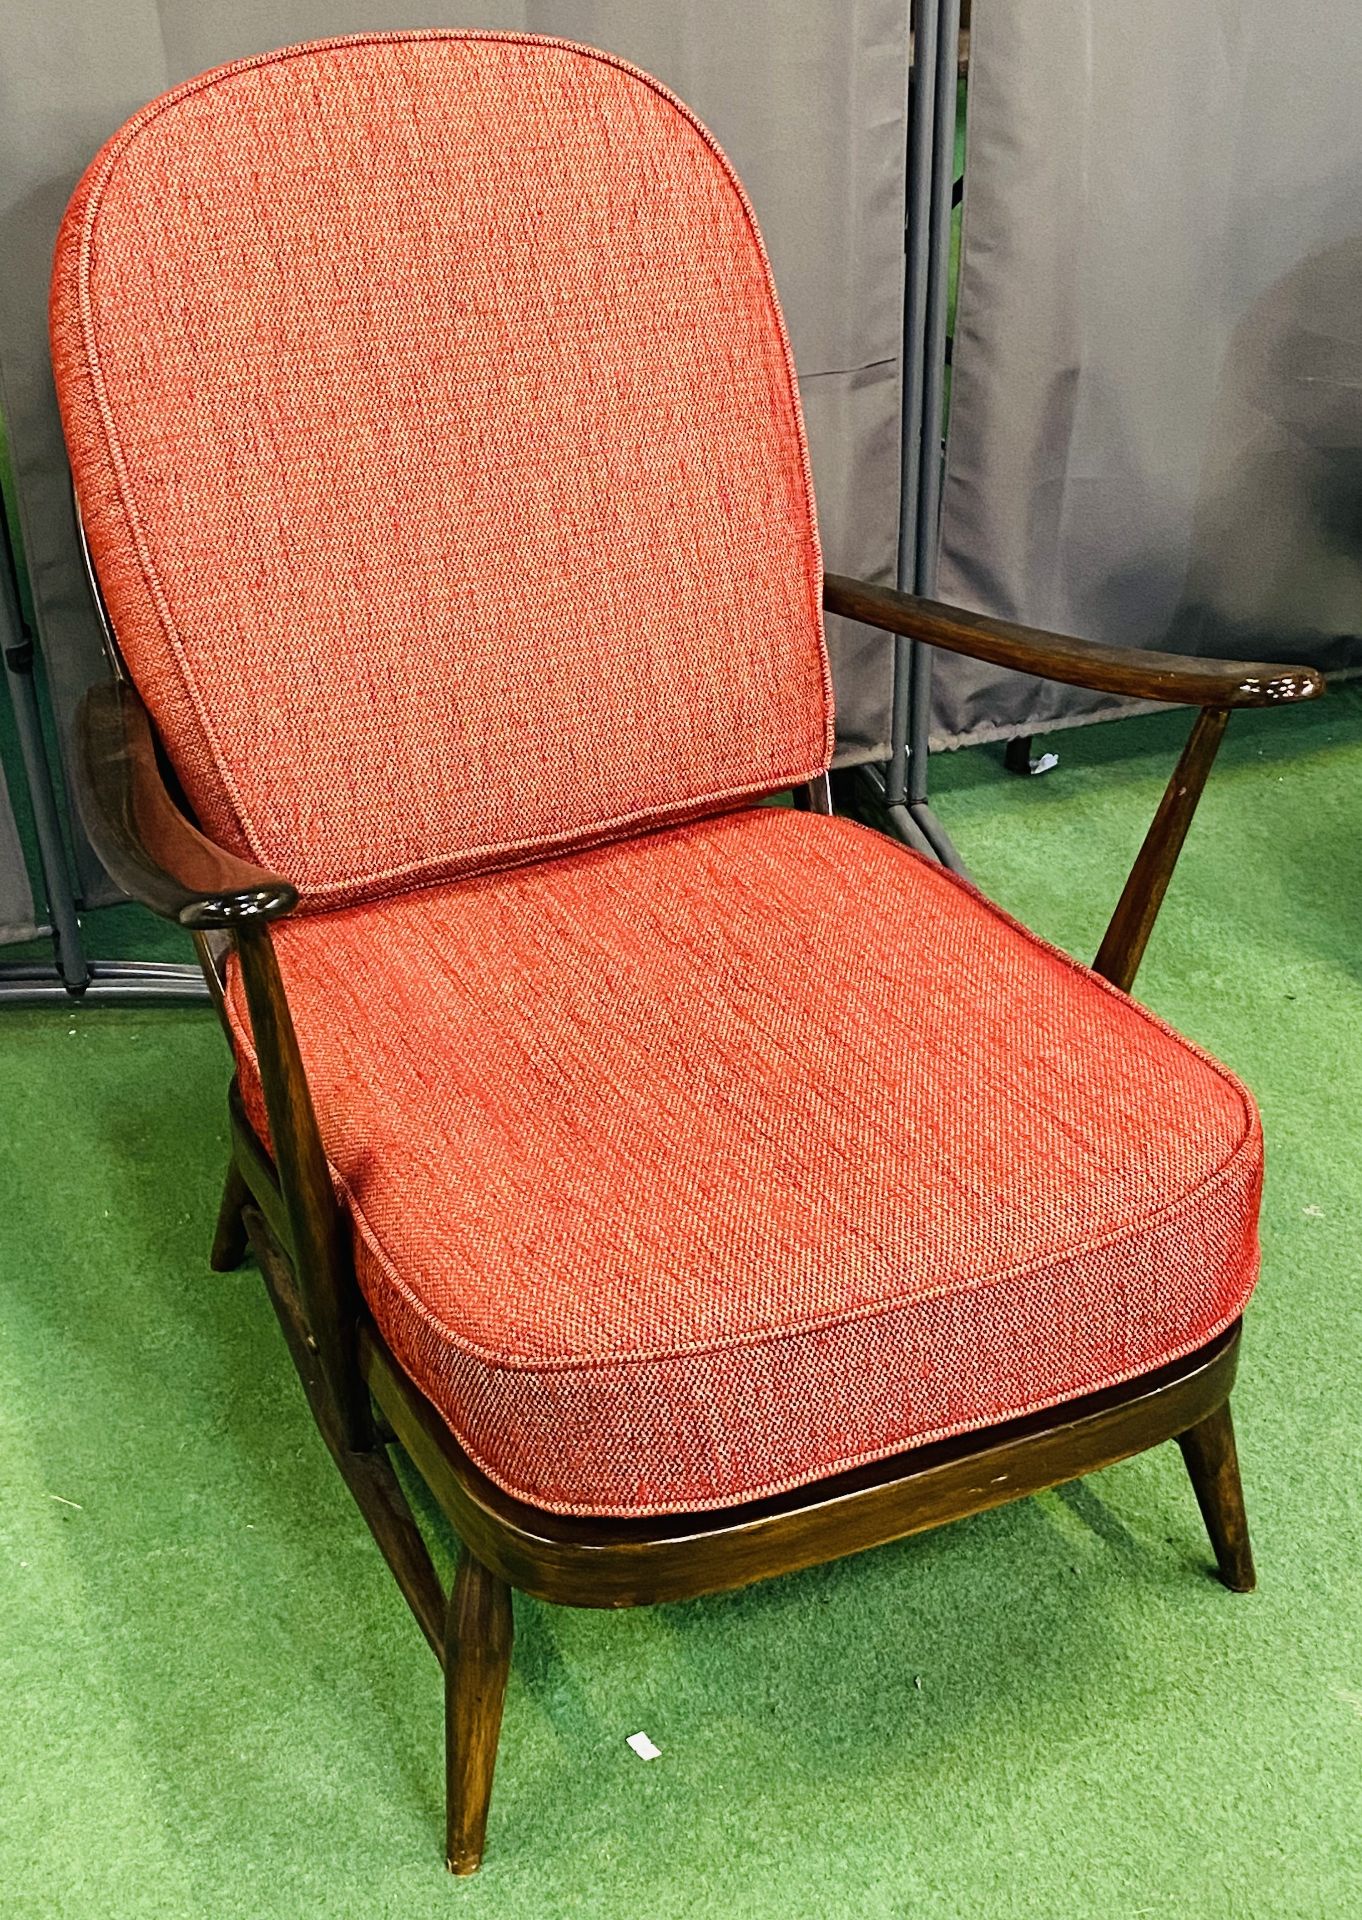 Ercol style spindle back armchair - Image 3 of 5